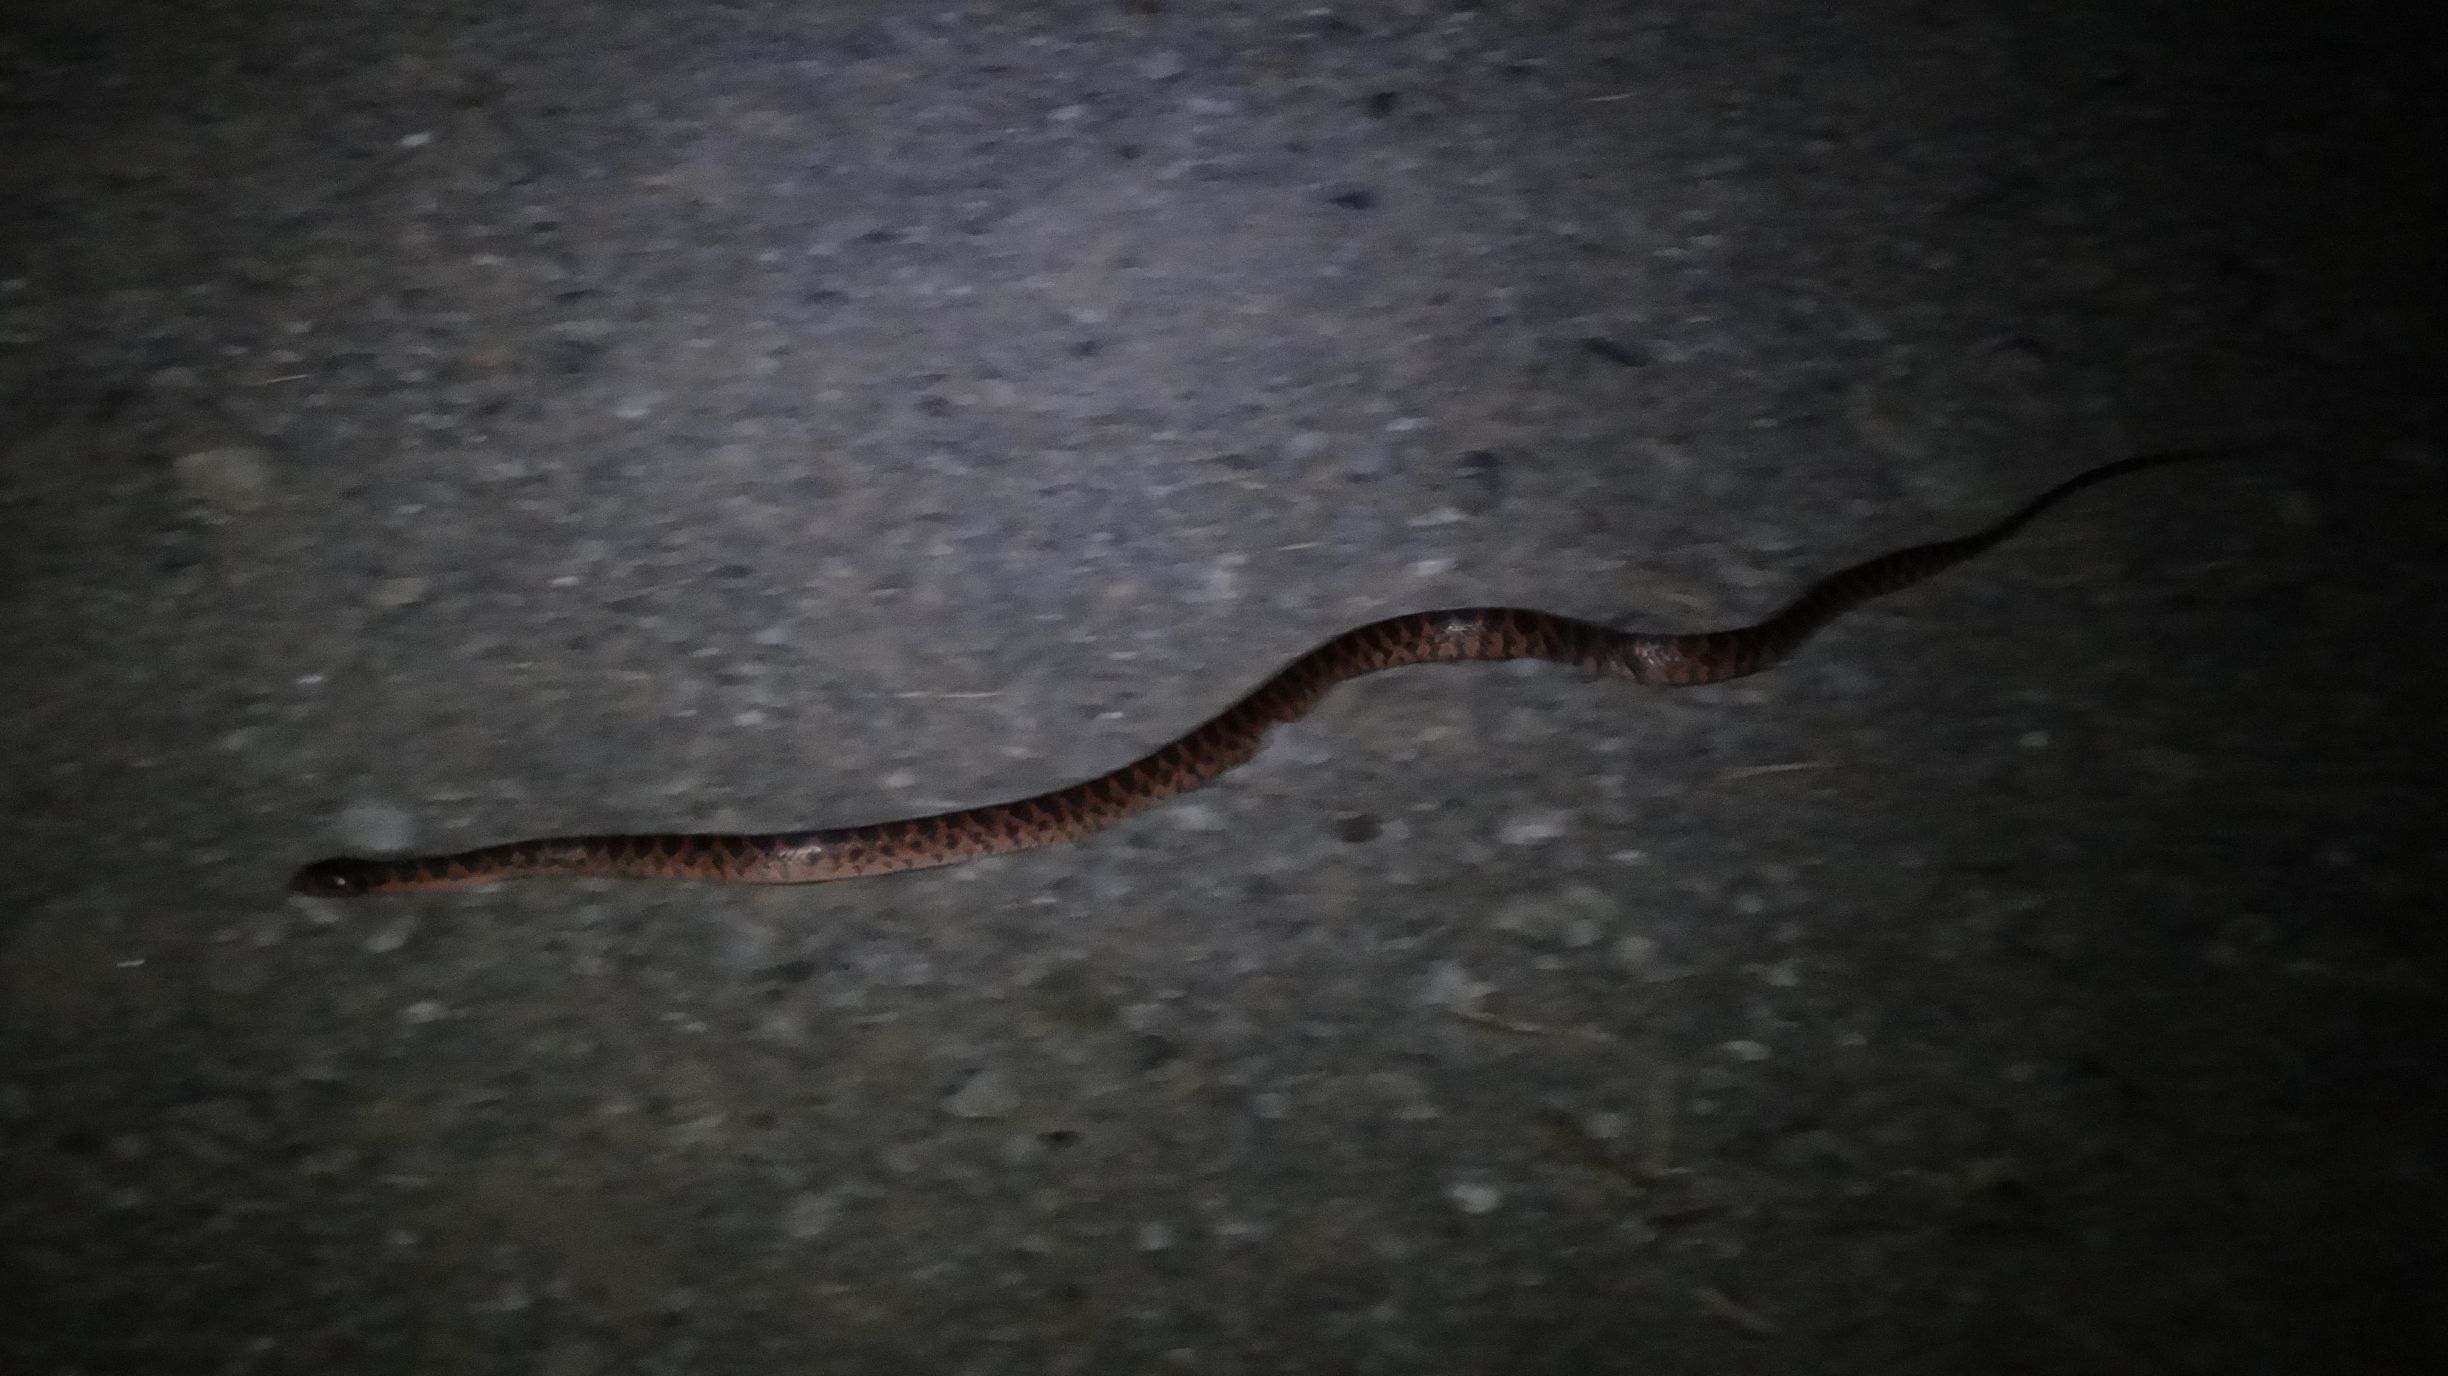 one of our night time land snakes, they were everywhere!